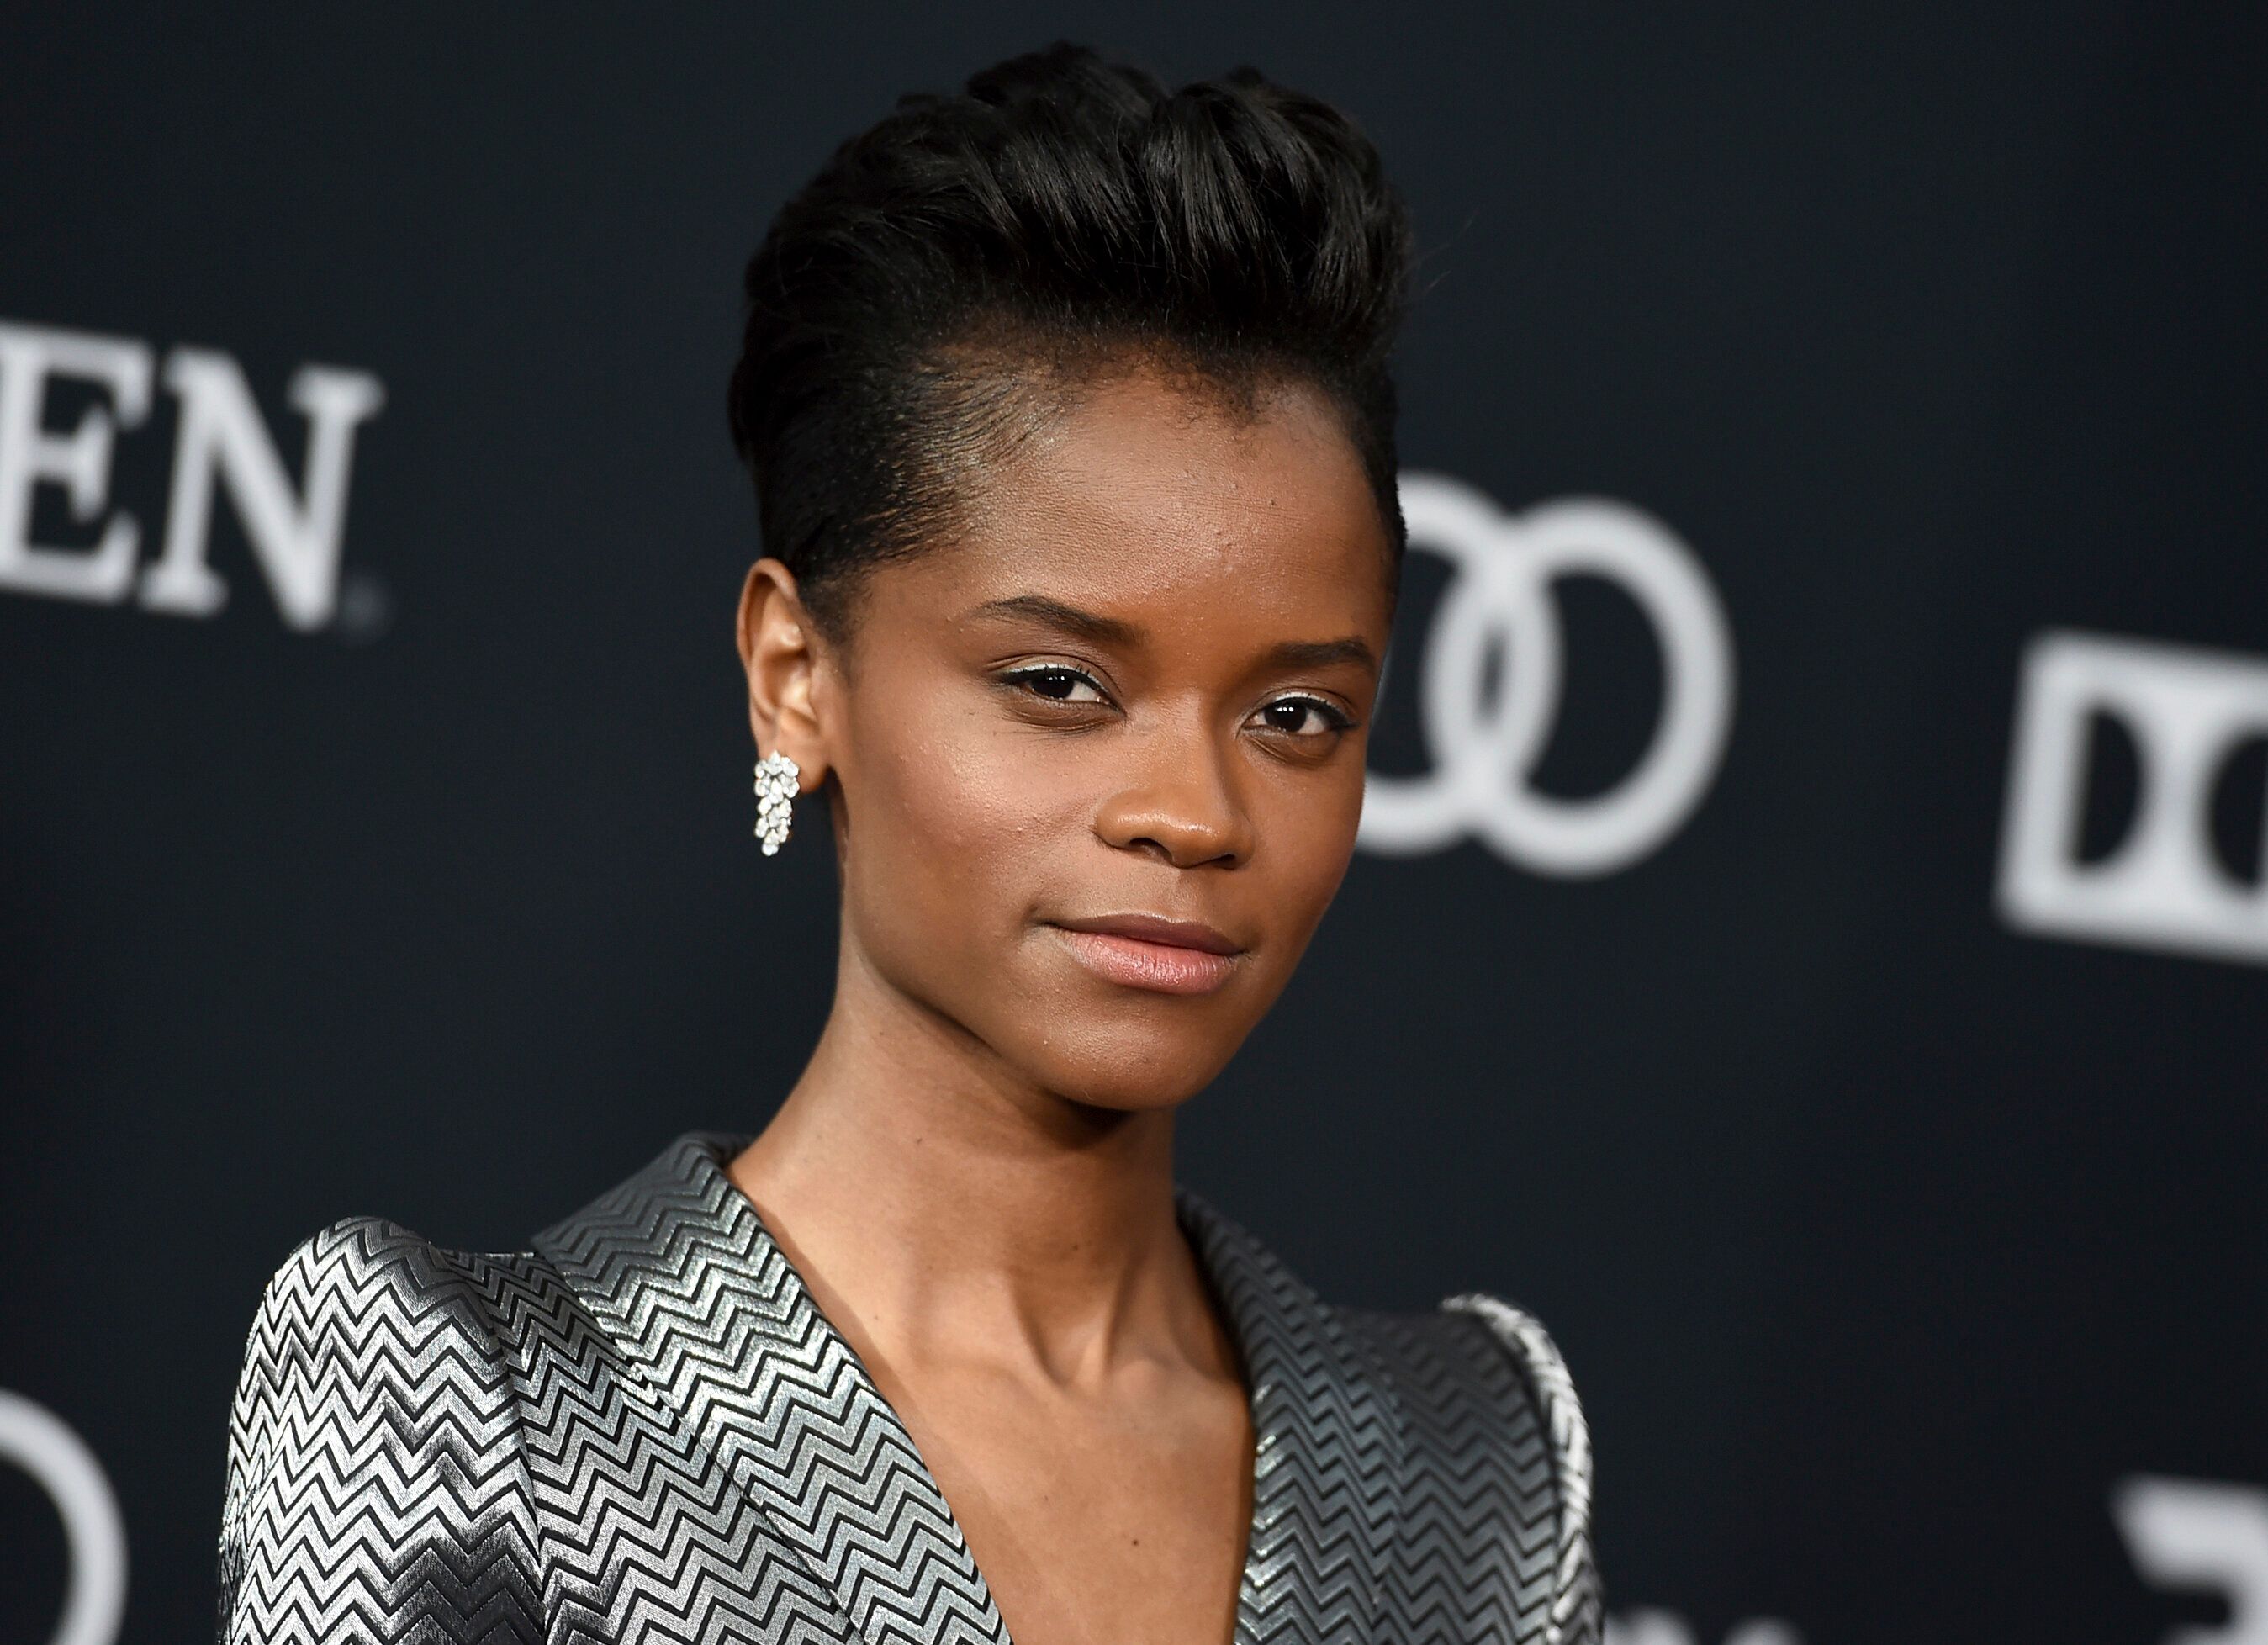 Letitia Wright at a premiere in